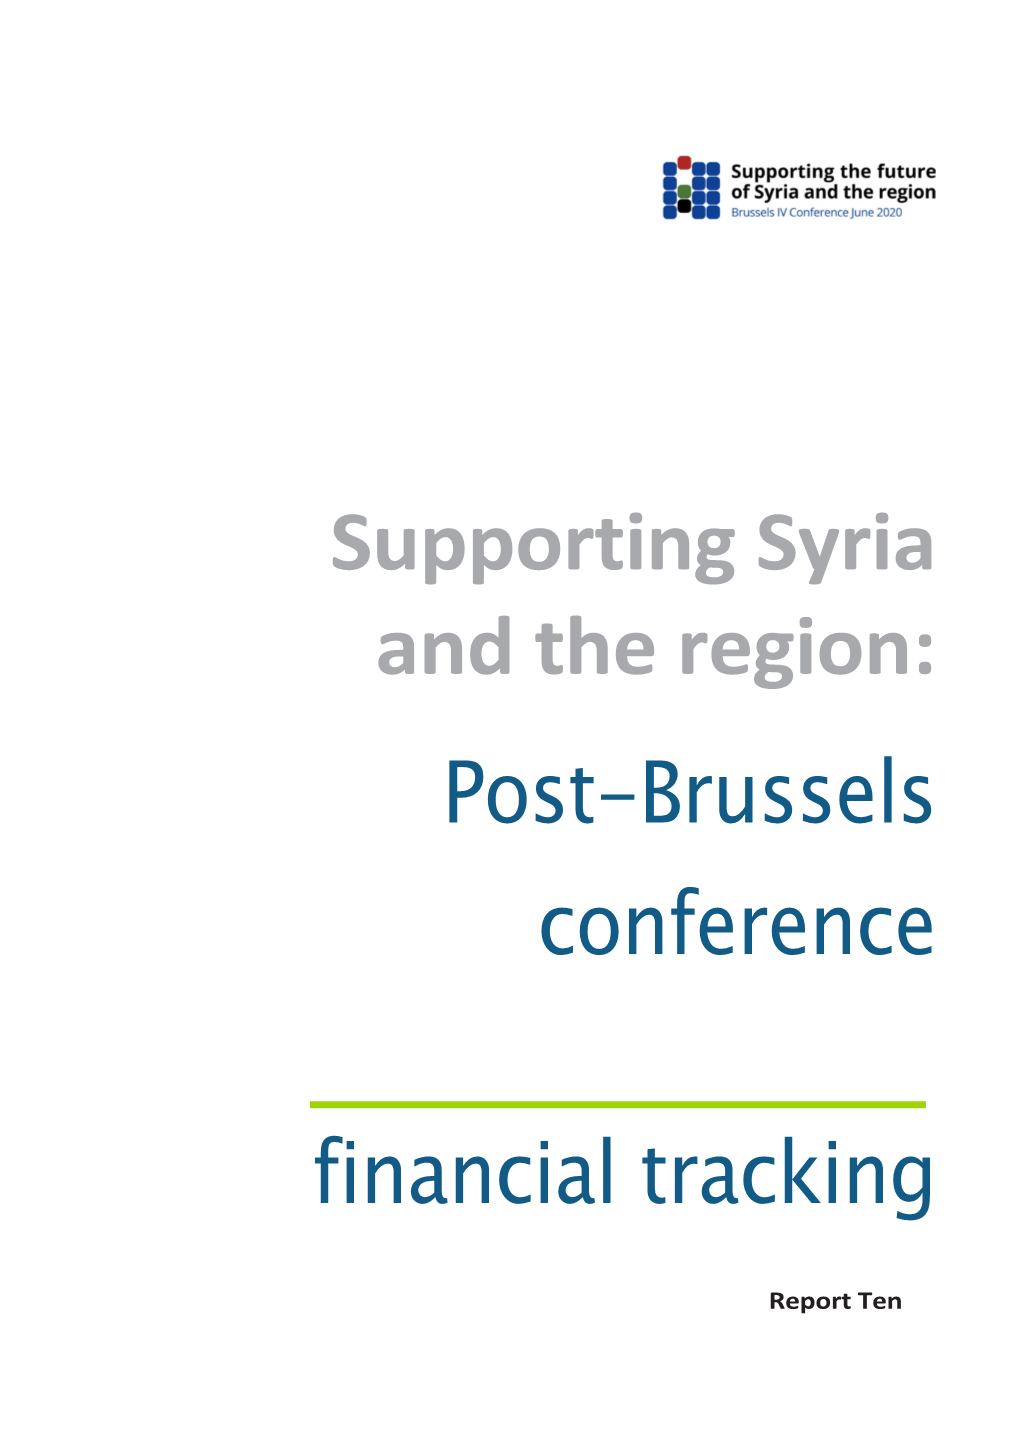 Post-Brussels Conference Financial Tracking